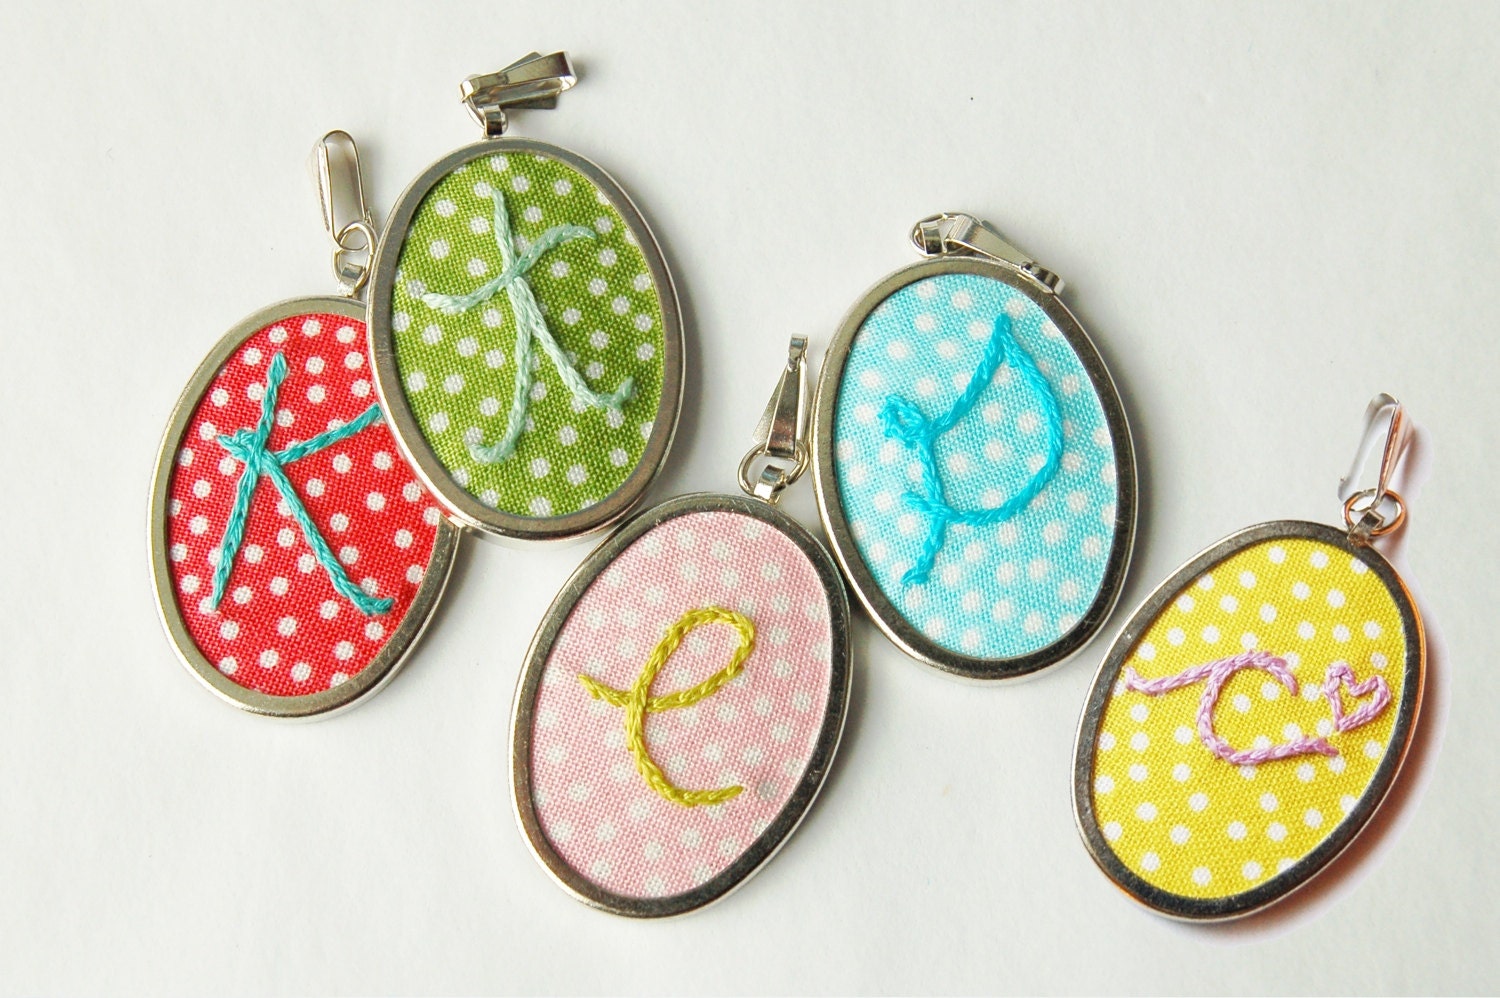 Personalized Embroidered Initial PENDANT - NO CHAIN. On Printed Polka Dot Fabric, Five Color Options.  by merriweathercouncil on Etsy.